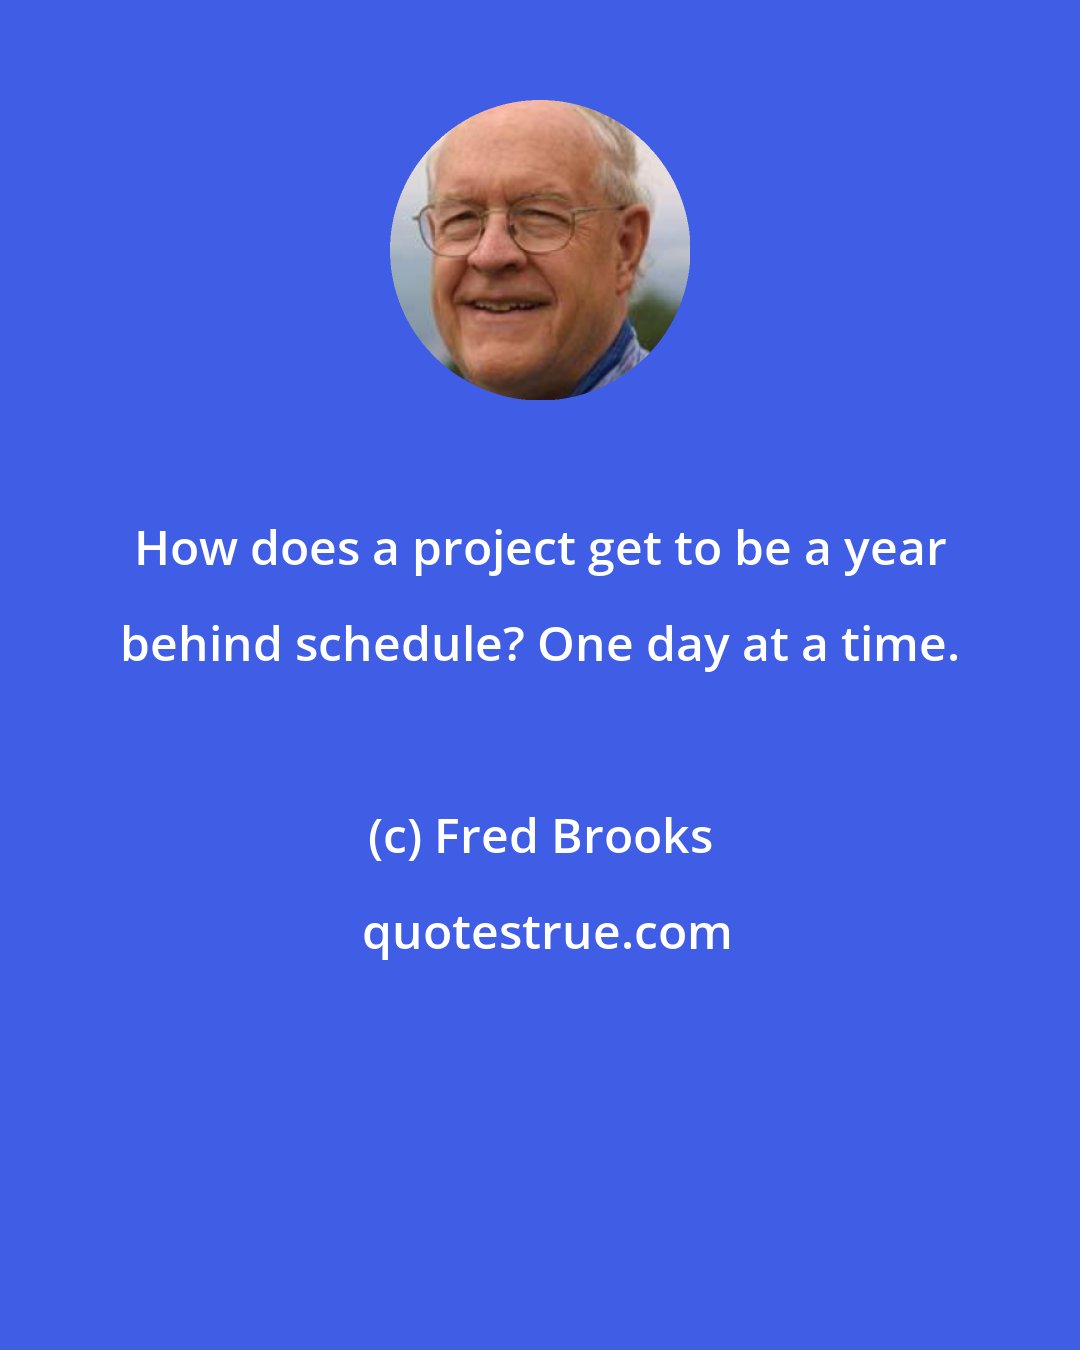 Fred Brooks: How does a project get to be a year behind schedule? One day at a time.